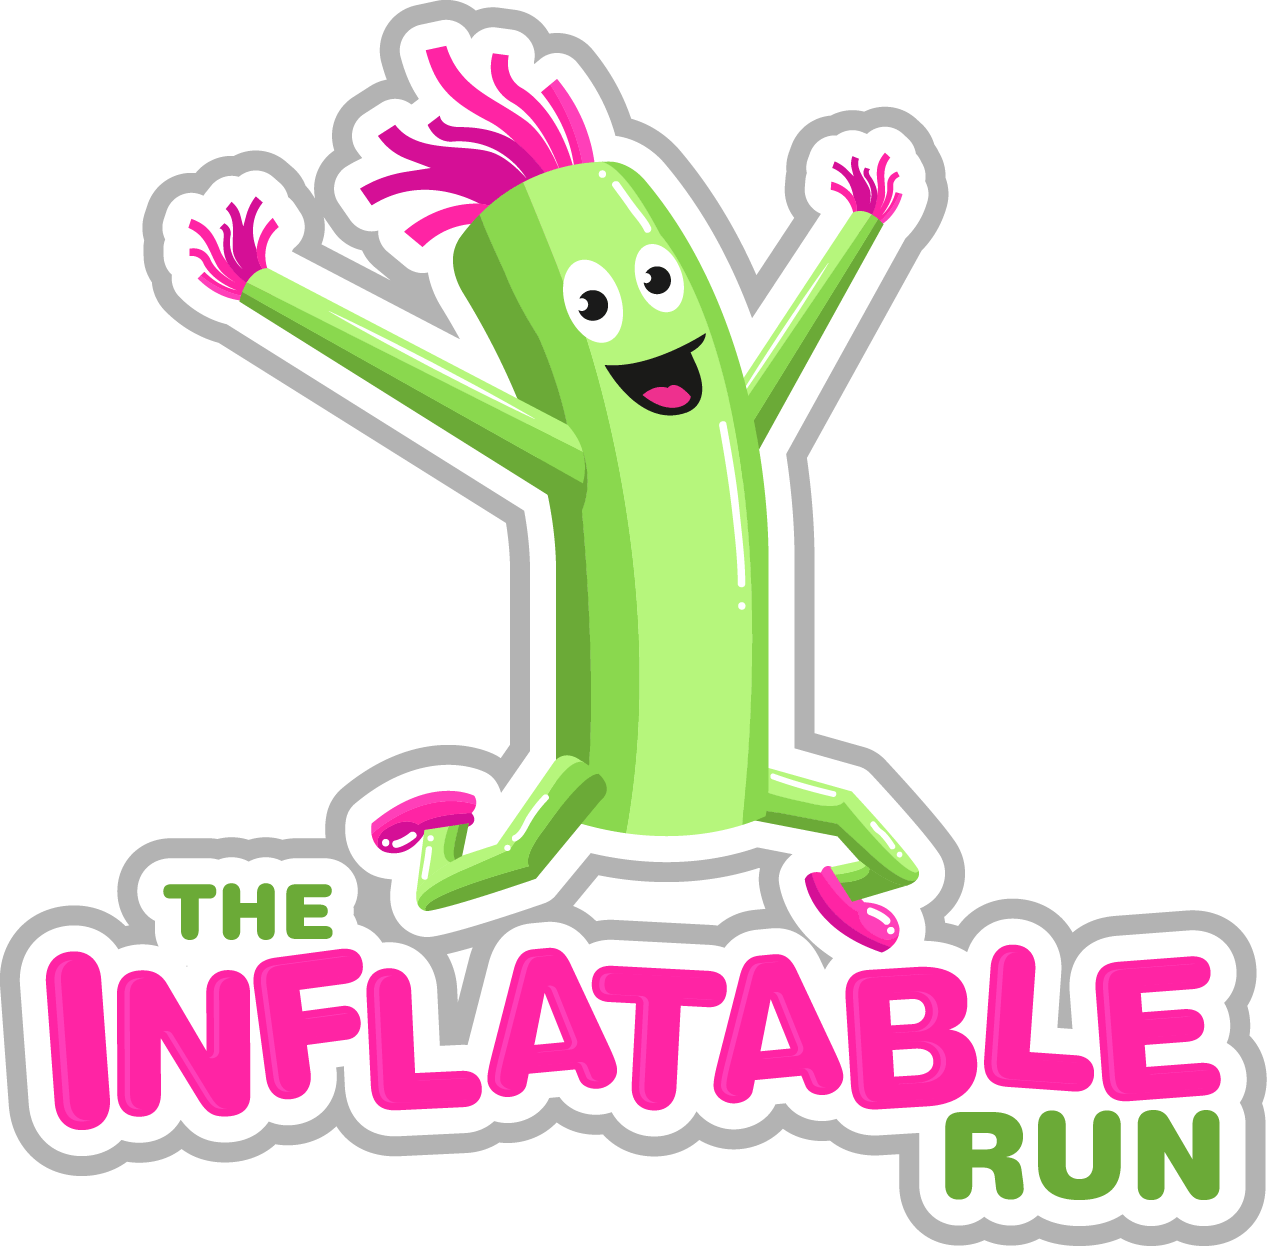 The Inflatable Run